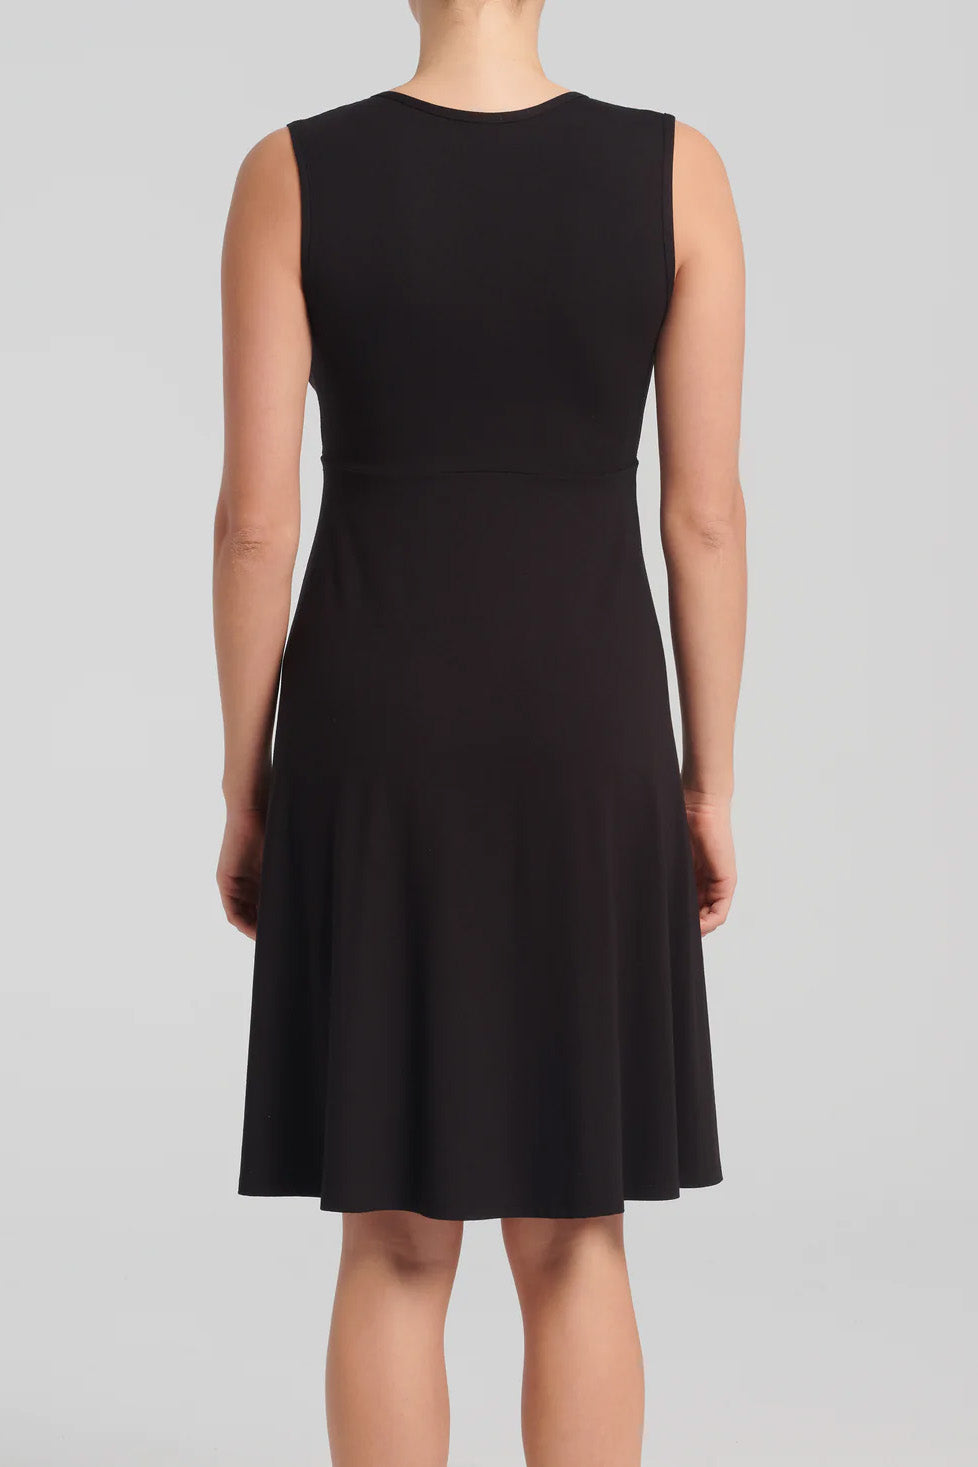 Ayesha Dress by Kollontai, Black, back view, wrap-over neckline, wide straps, empire waist, loose fit through the bodice, knee-length, pill-resistant viscose, sizes XS-XXL, made in Quebec